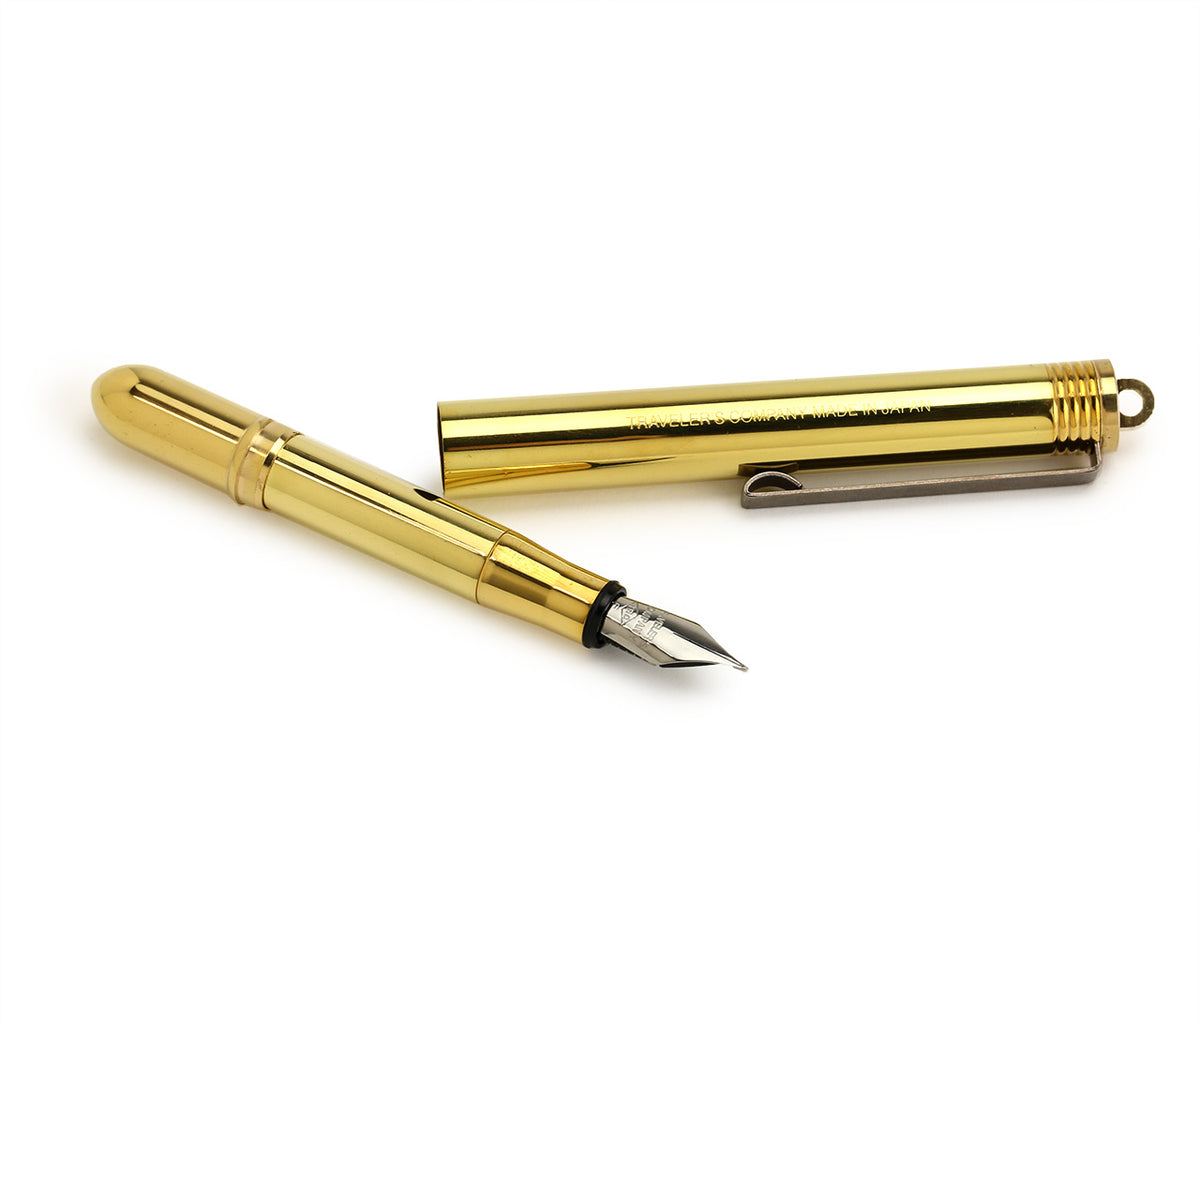 disassembled brass fountain pen whhere both pieces are similar length, fountain pen end and long cap end which posts onto the pen